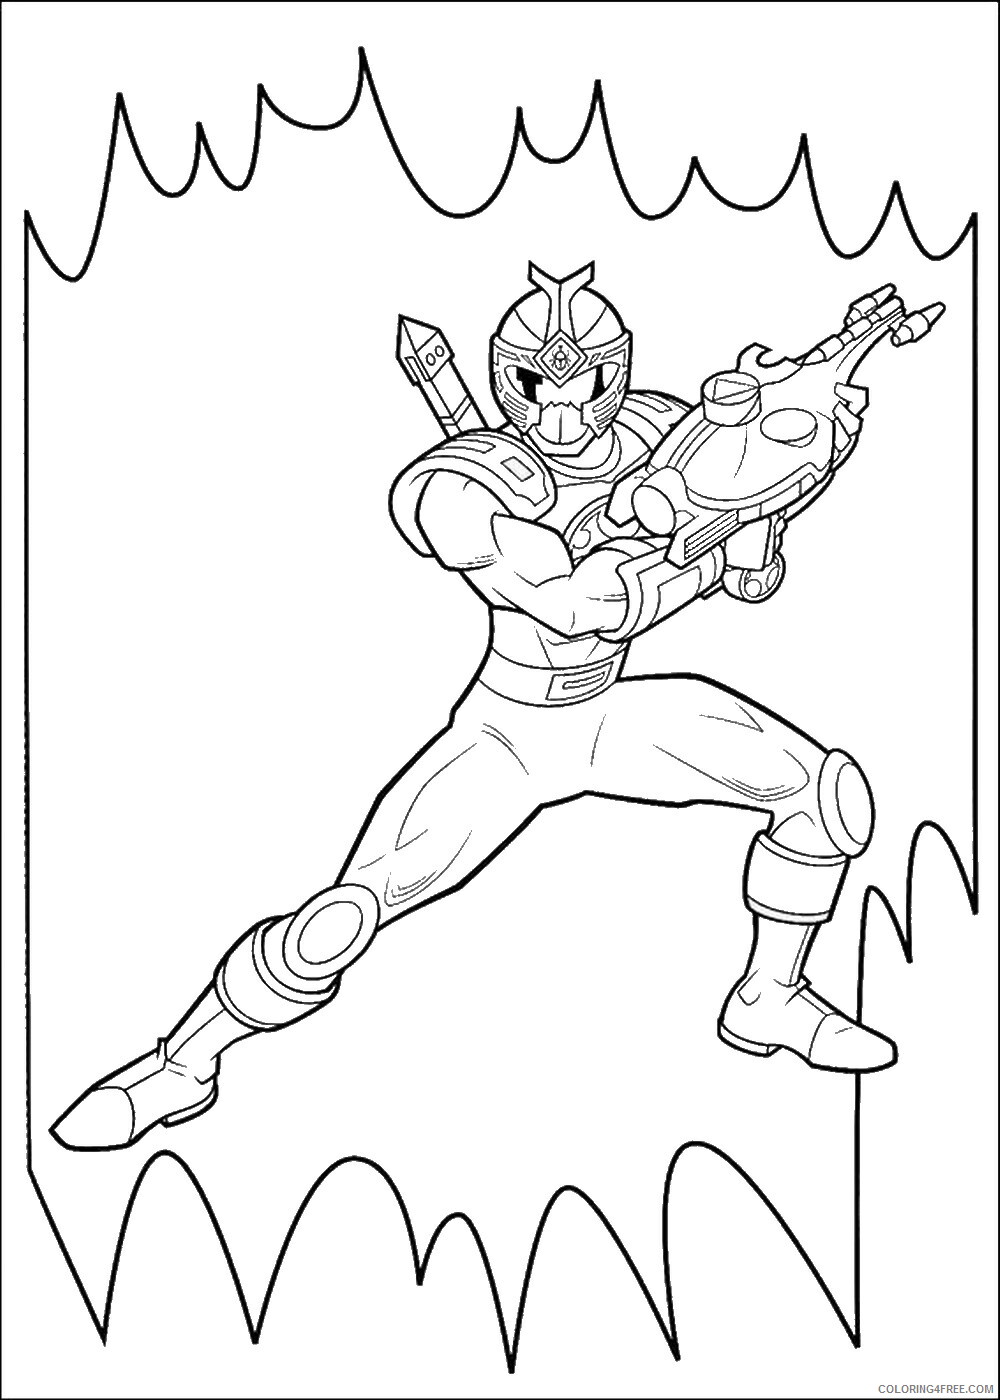 Power Rangers Coloring Pages TV Film power_rangers10 Printable 2020 06698 Coloring4free